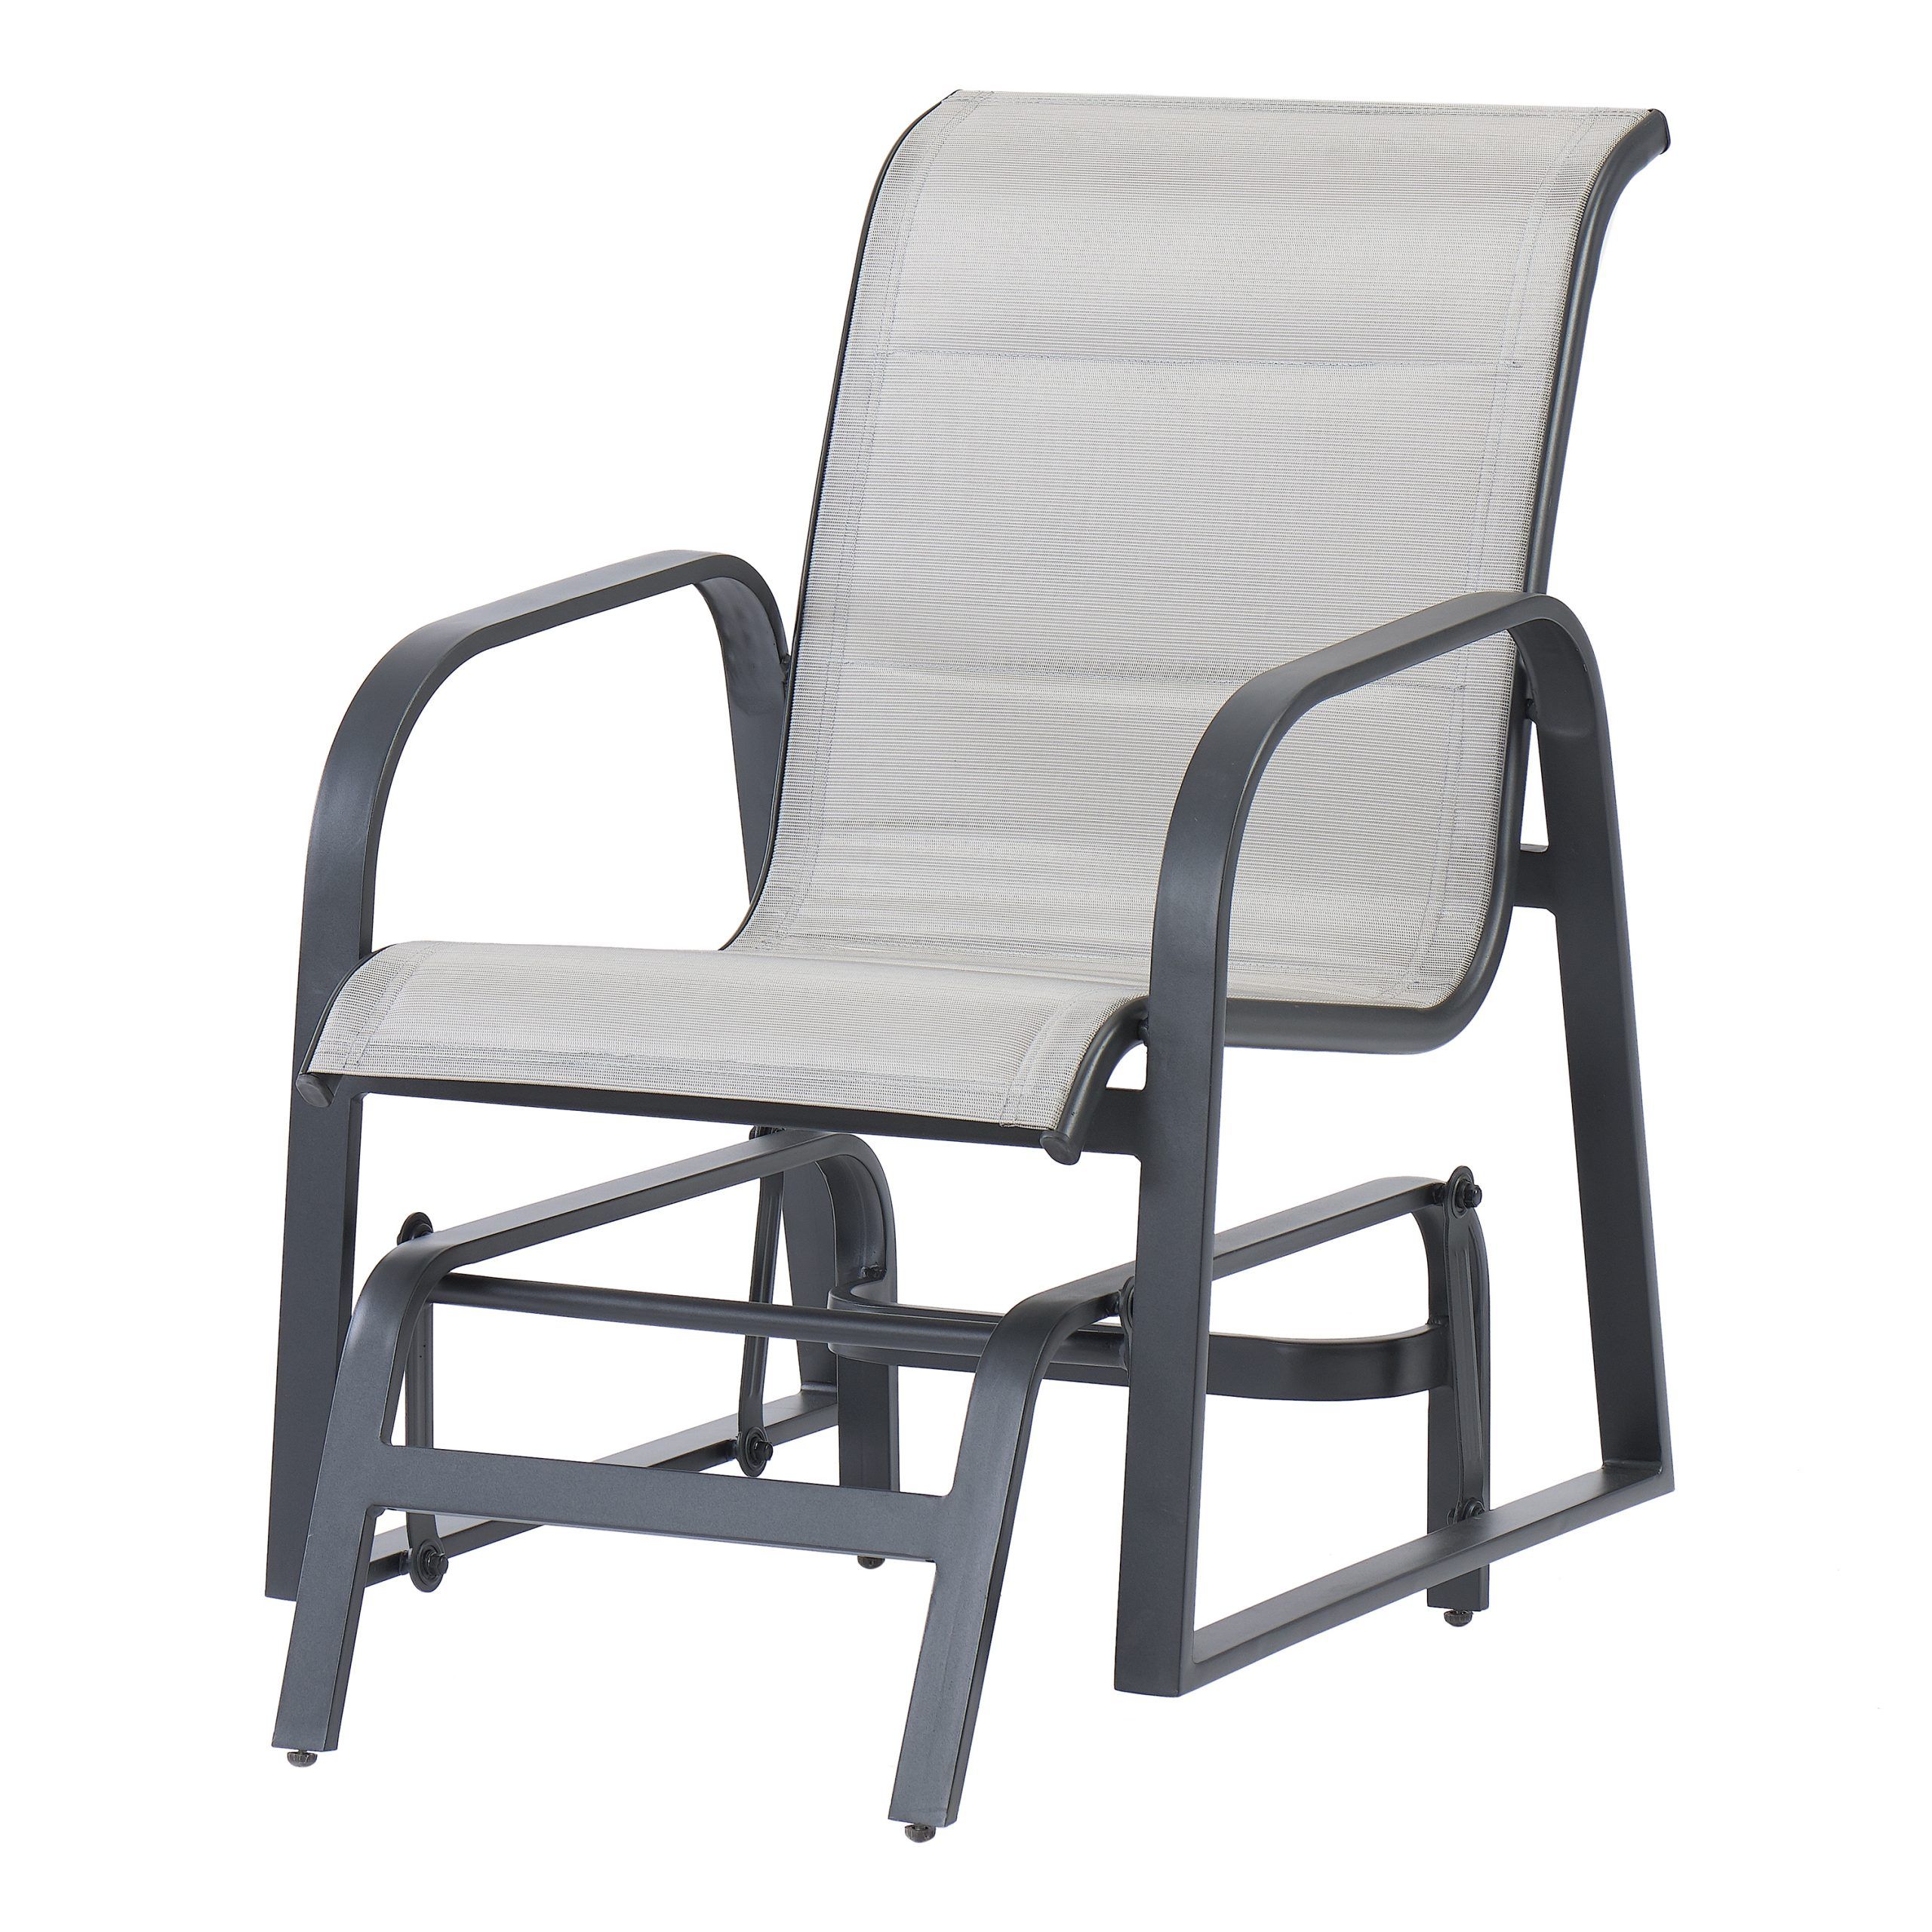 Better Homes & Gardens Montrose Padded Sling Glider Chair – Walmart Pertaining To Padded Sling Double Gliders (View 14 of 25)